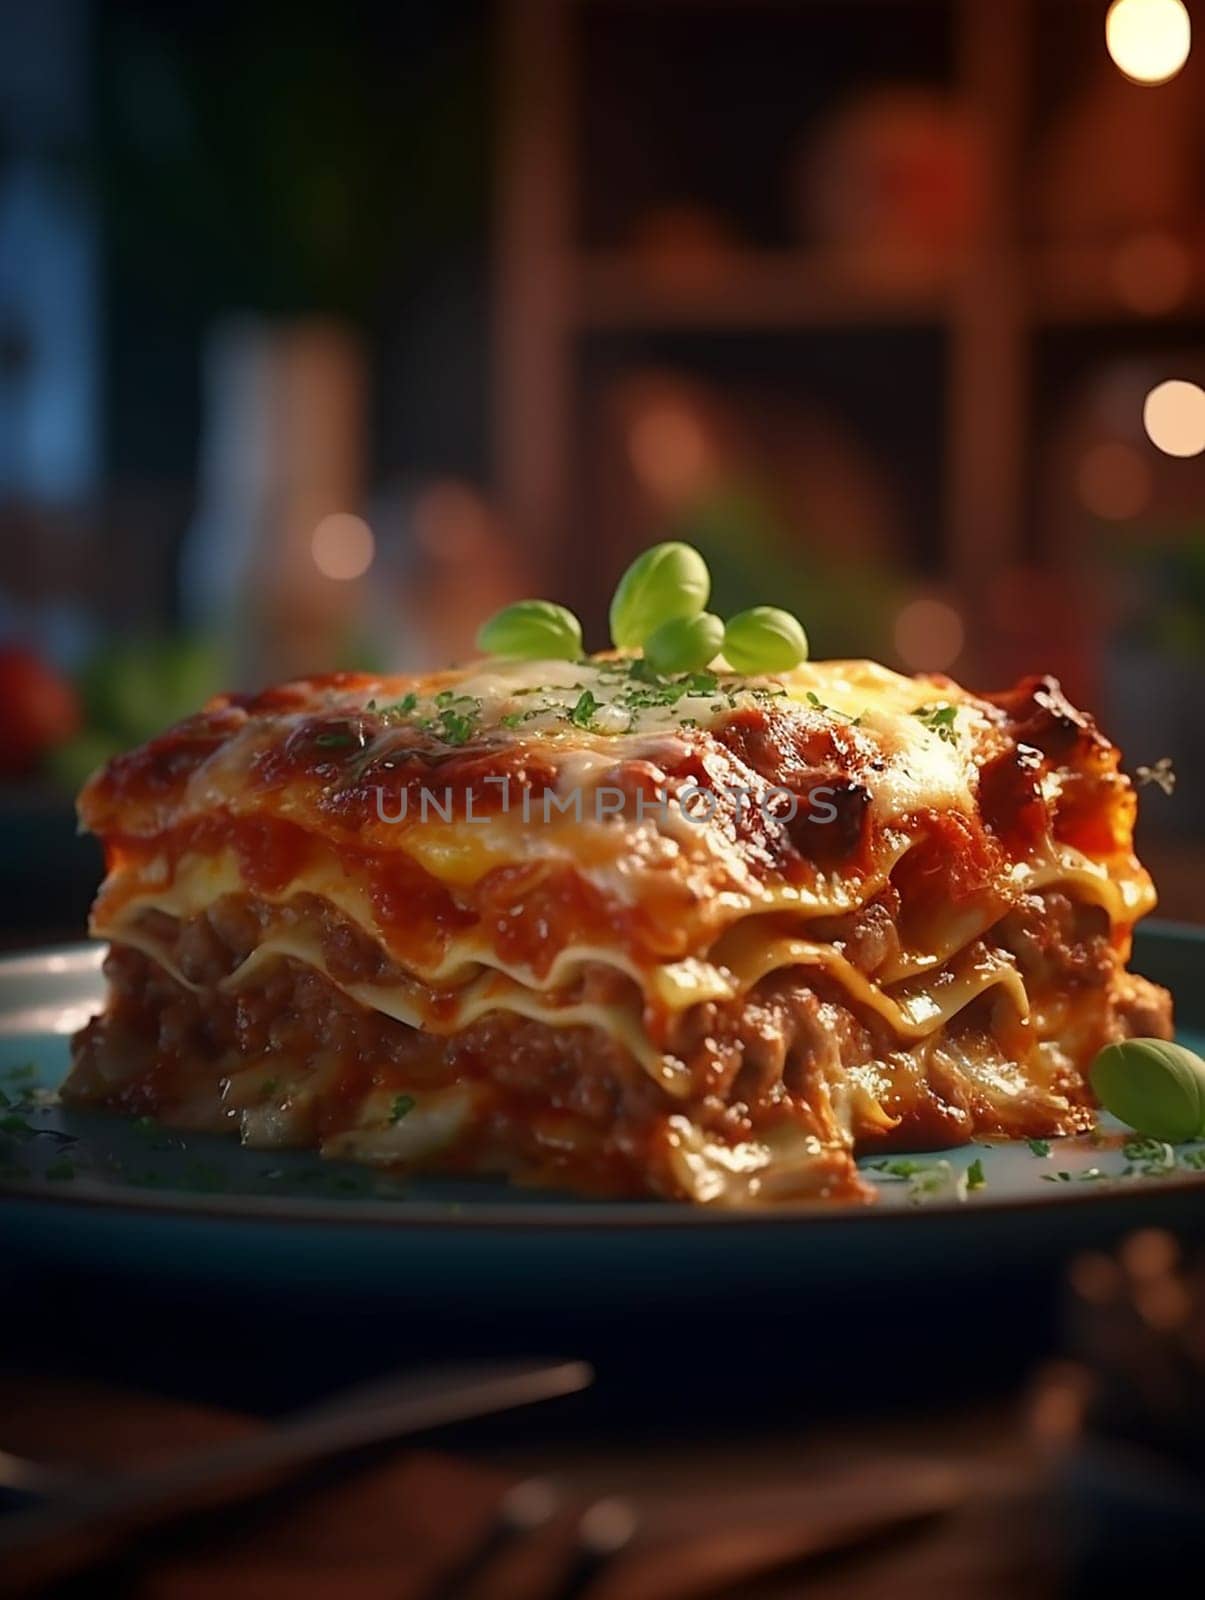 A delicious layered lasagna garnished with fresh herbs on a plate.